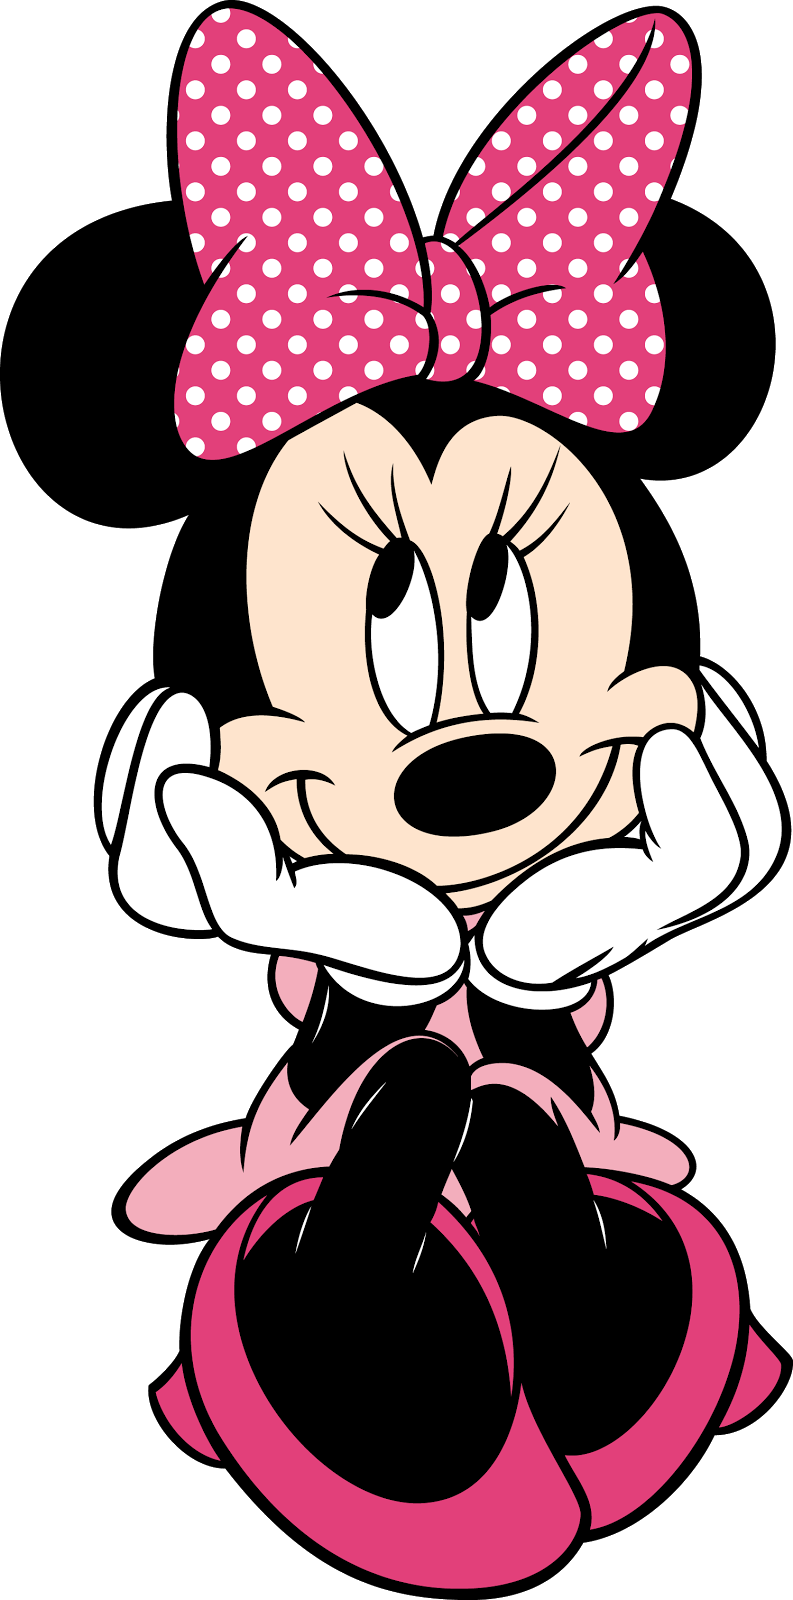 Minnie Mouse Head Clip Art Free Clipart Images u0026middot; Minthink Png Adelynn 3rd Birthday Pinterest Clip